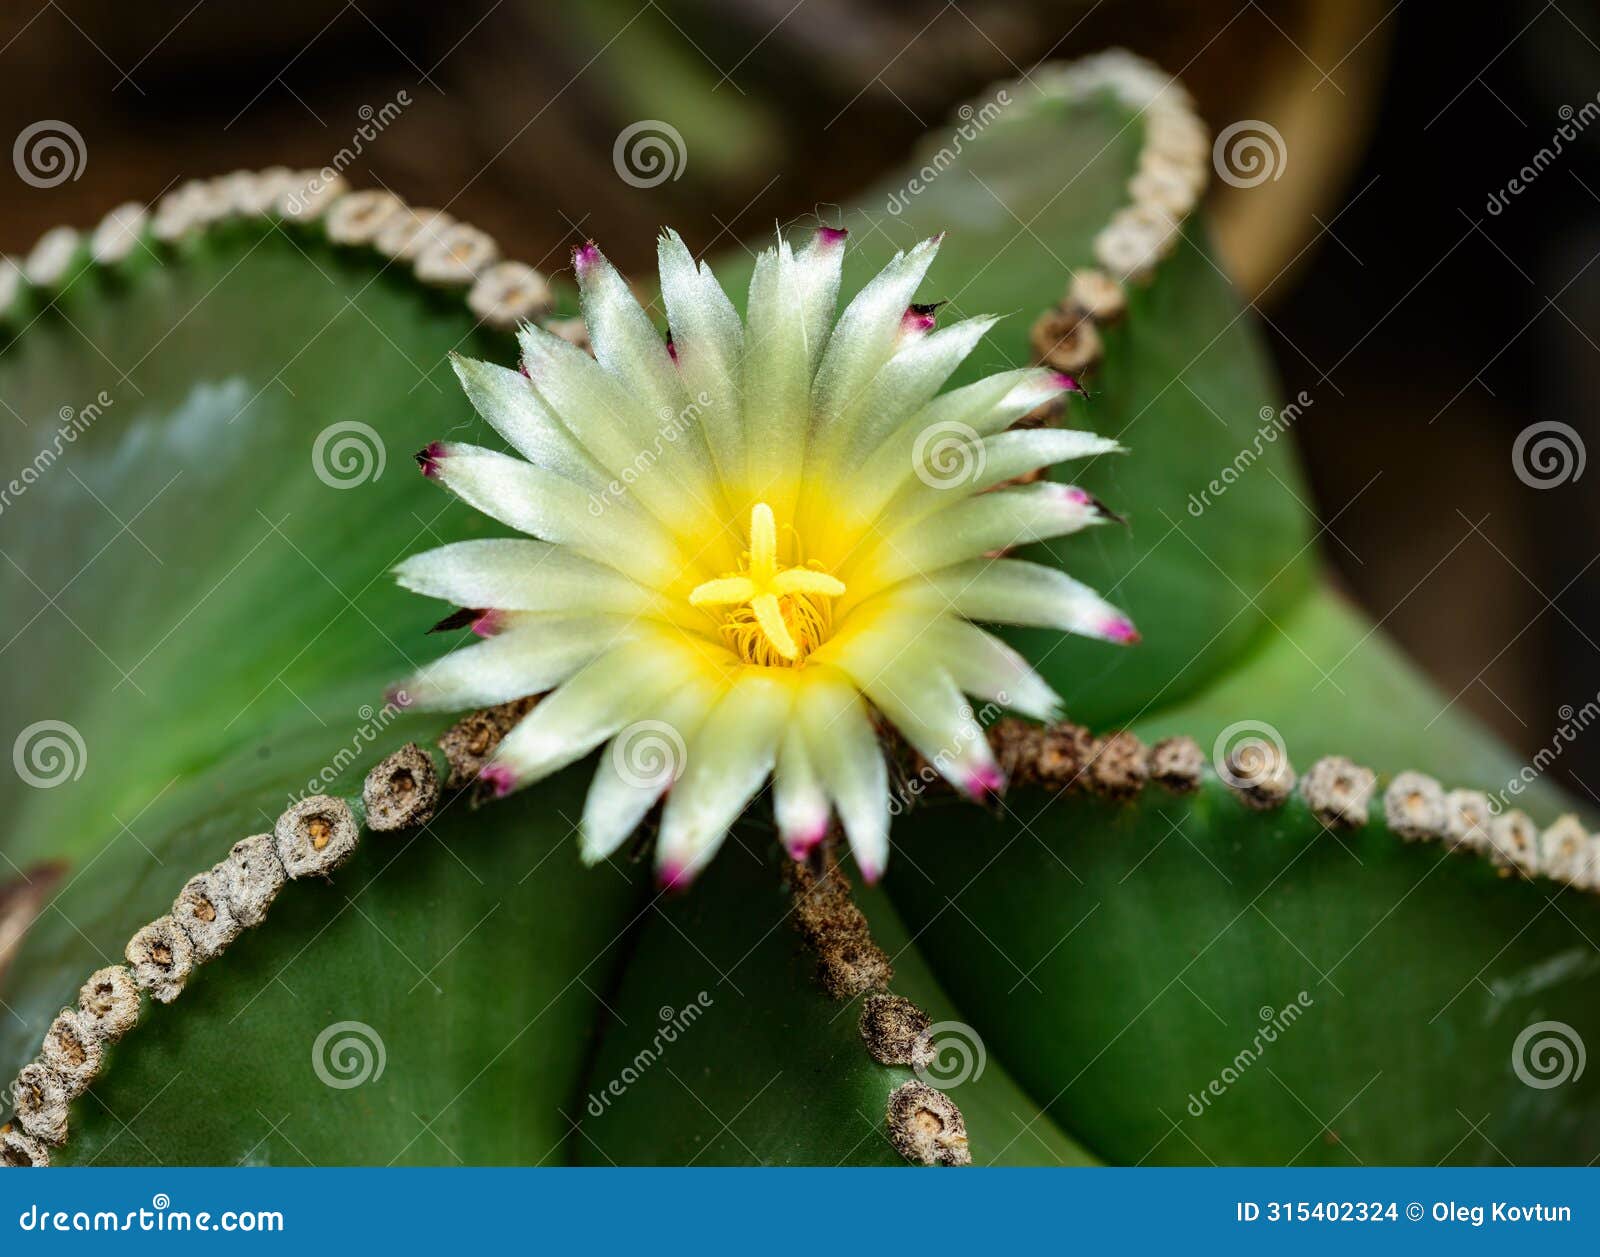 astrophytum ornatum, cactus blooming with a yellow flower in the spring collection, ukraine